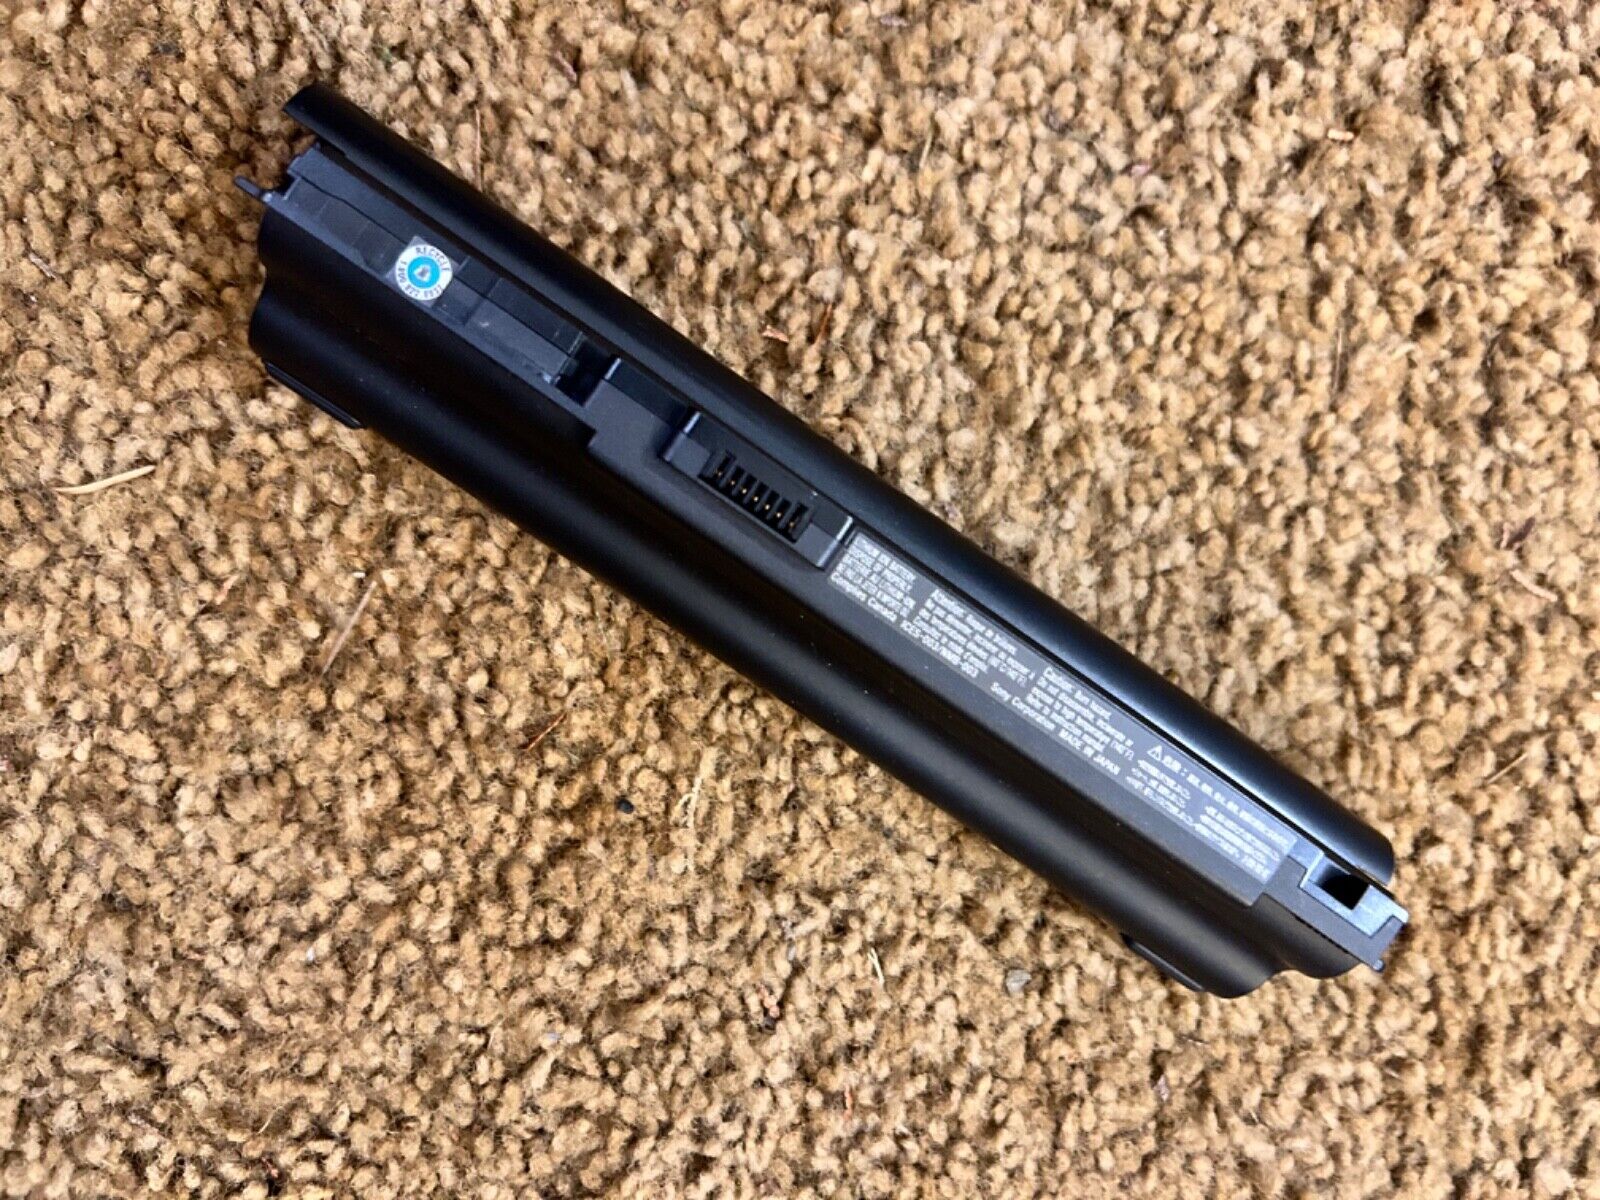 VGP-BPL11 Battery Original SONY VAIO VGP-BPX11 for parts only - barely charges